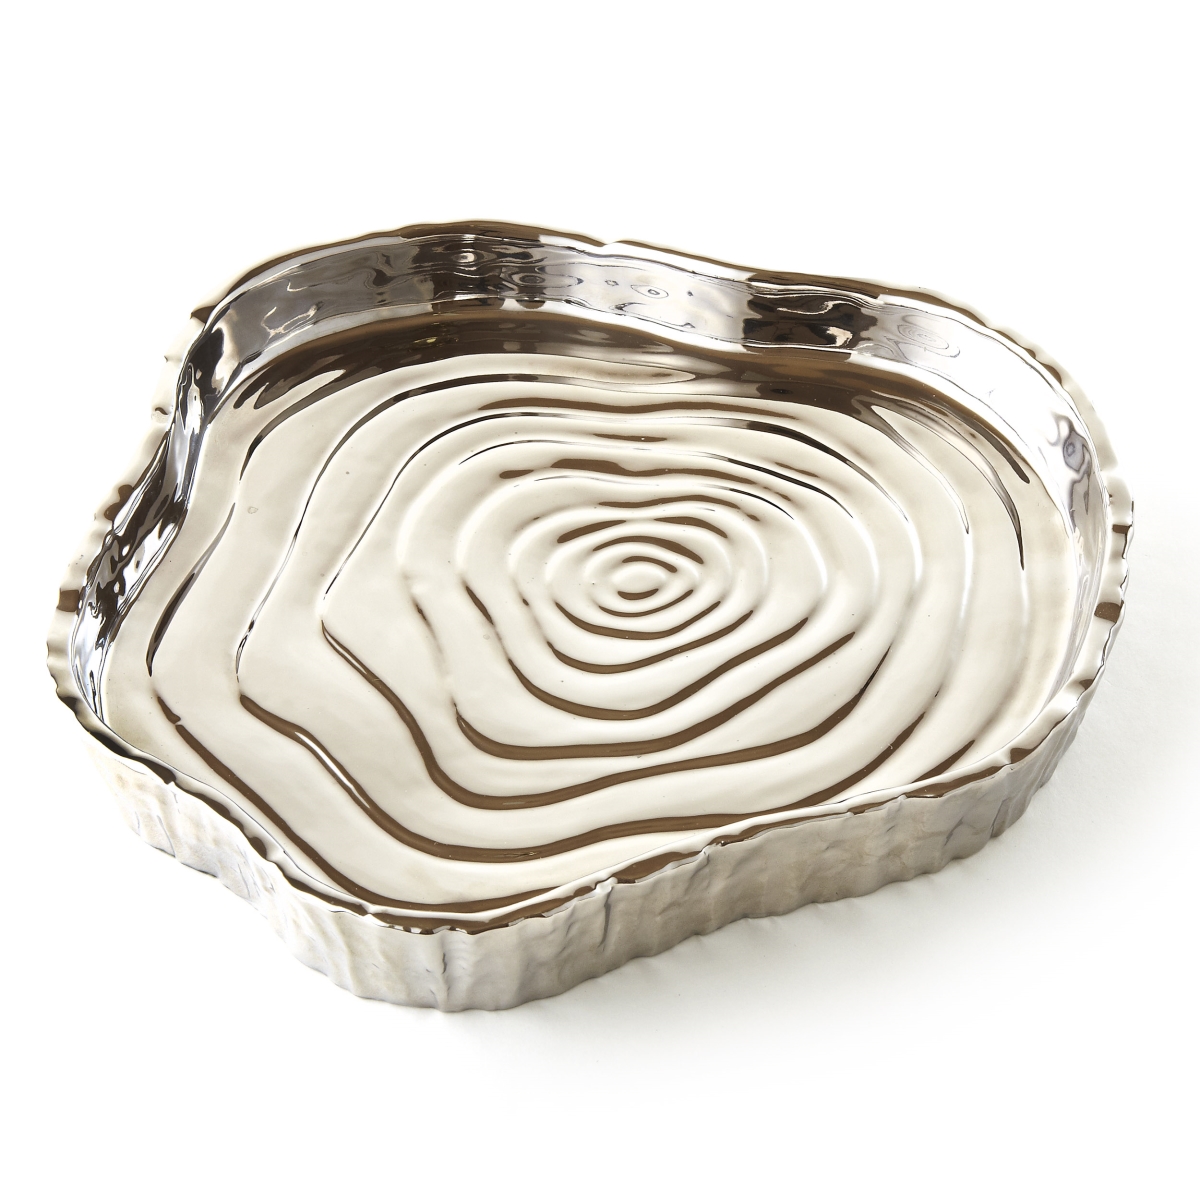 69110 8.75 X 8 In. Tree Bark Porcelain Serving Tray, Silver